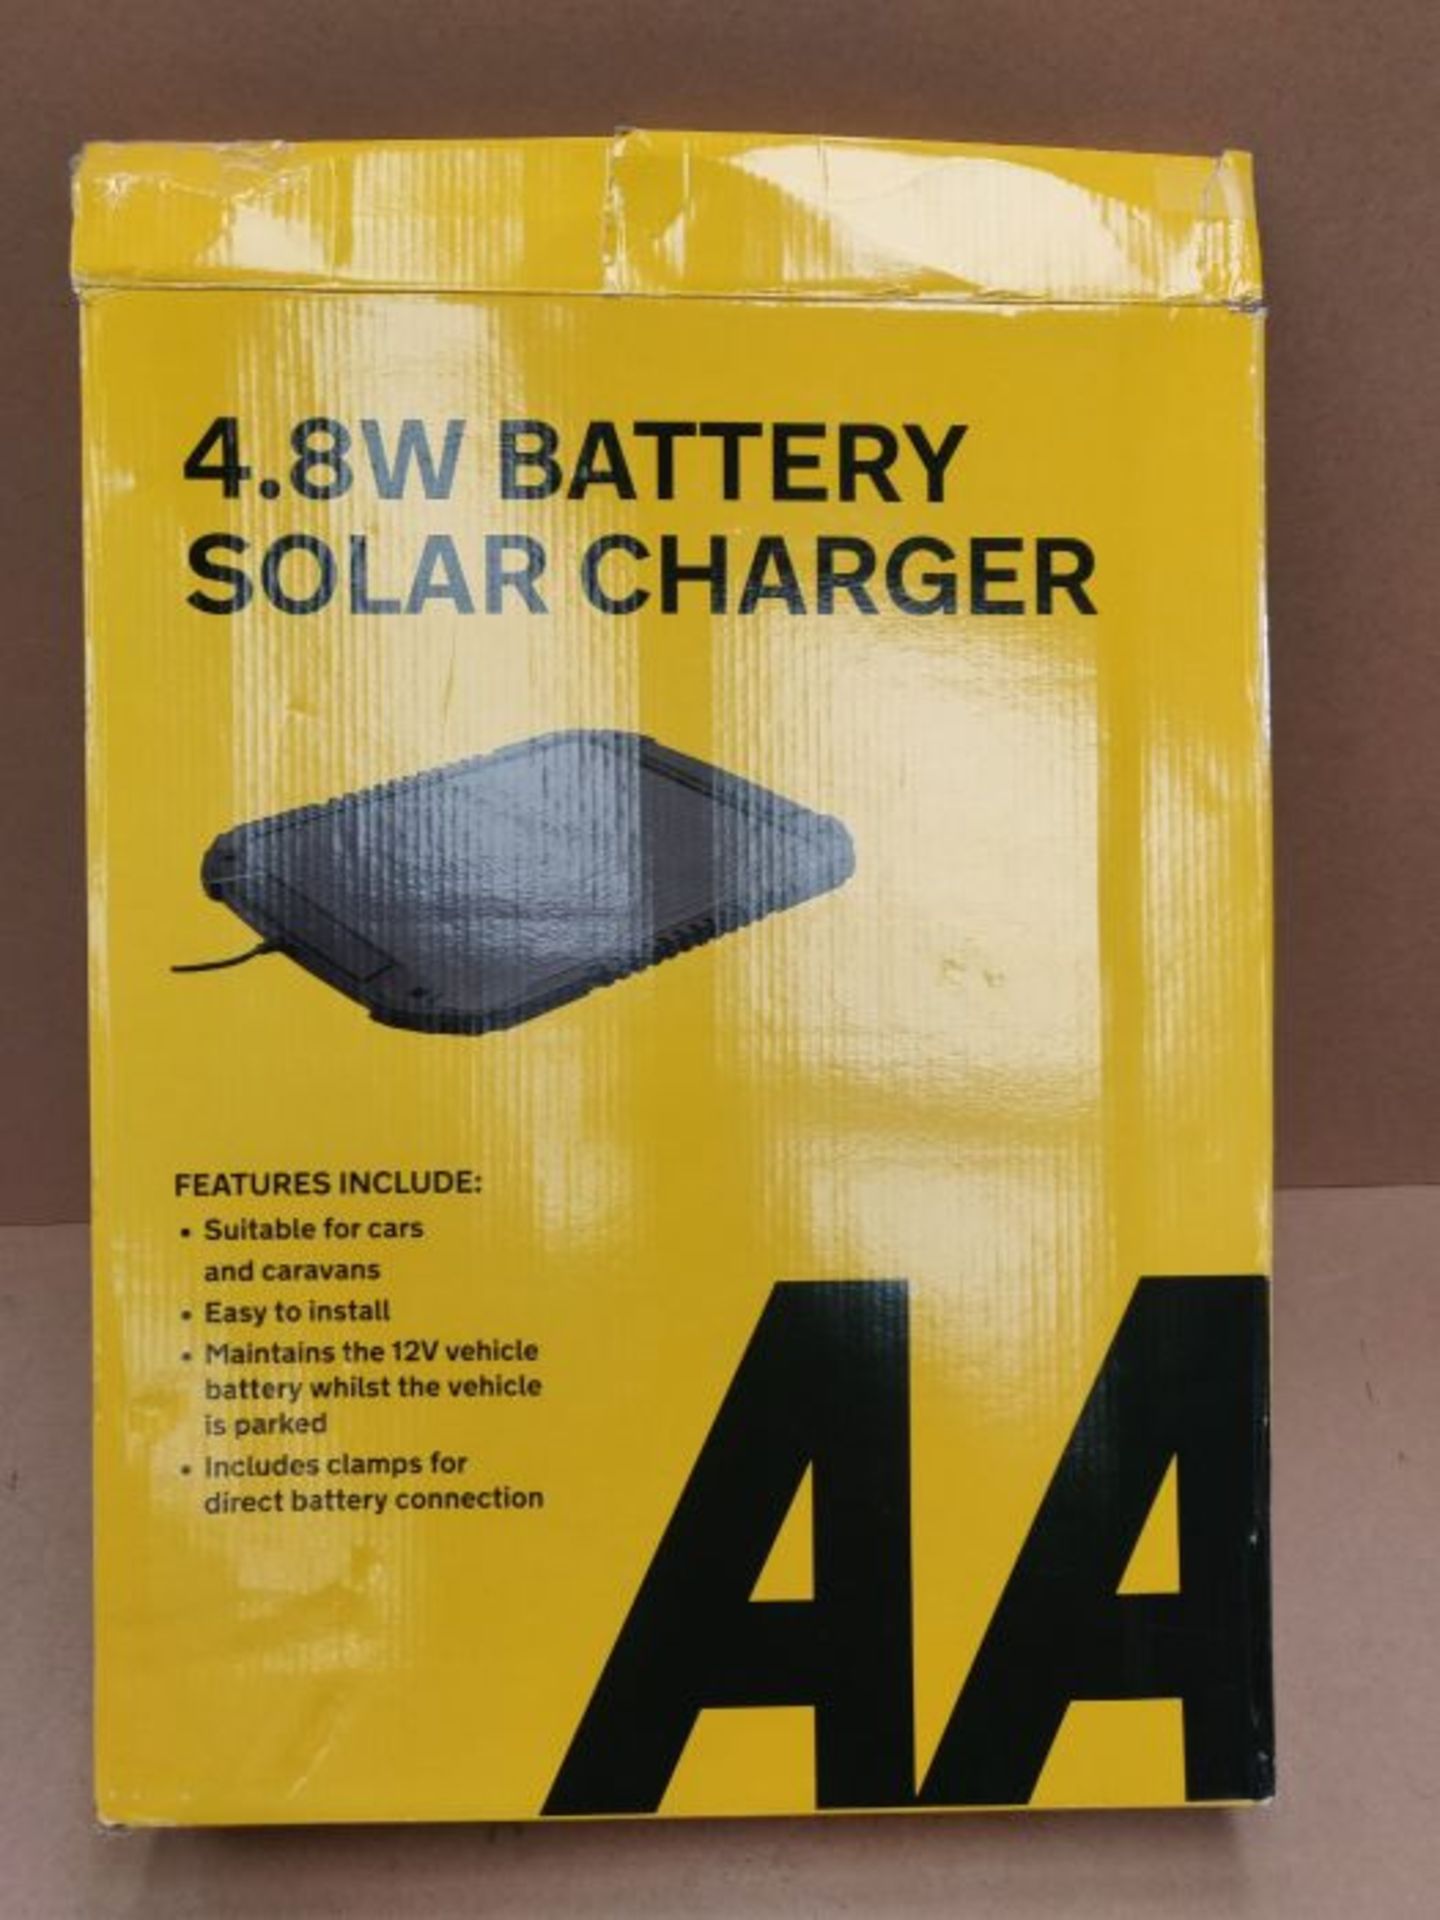 AA 12V Car Solar Battery Charger 4.8W AA1432 - For Vehicles And Caravans - Battery Con - Image 2 of 3